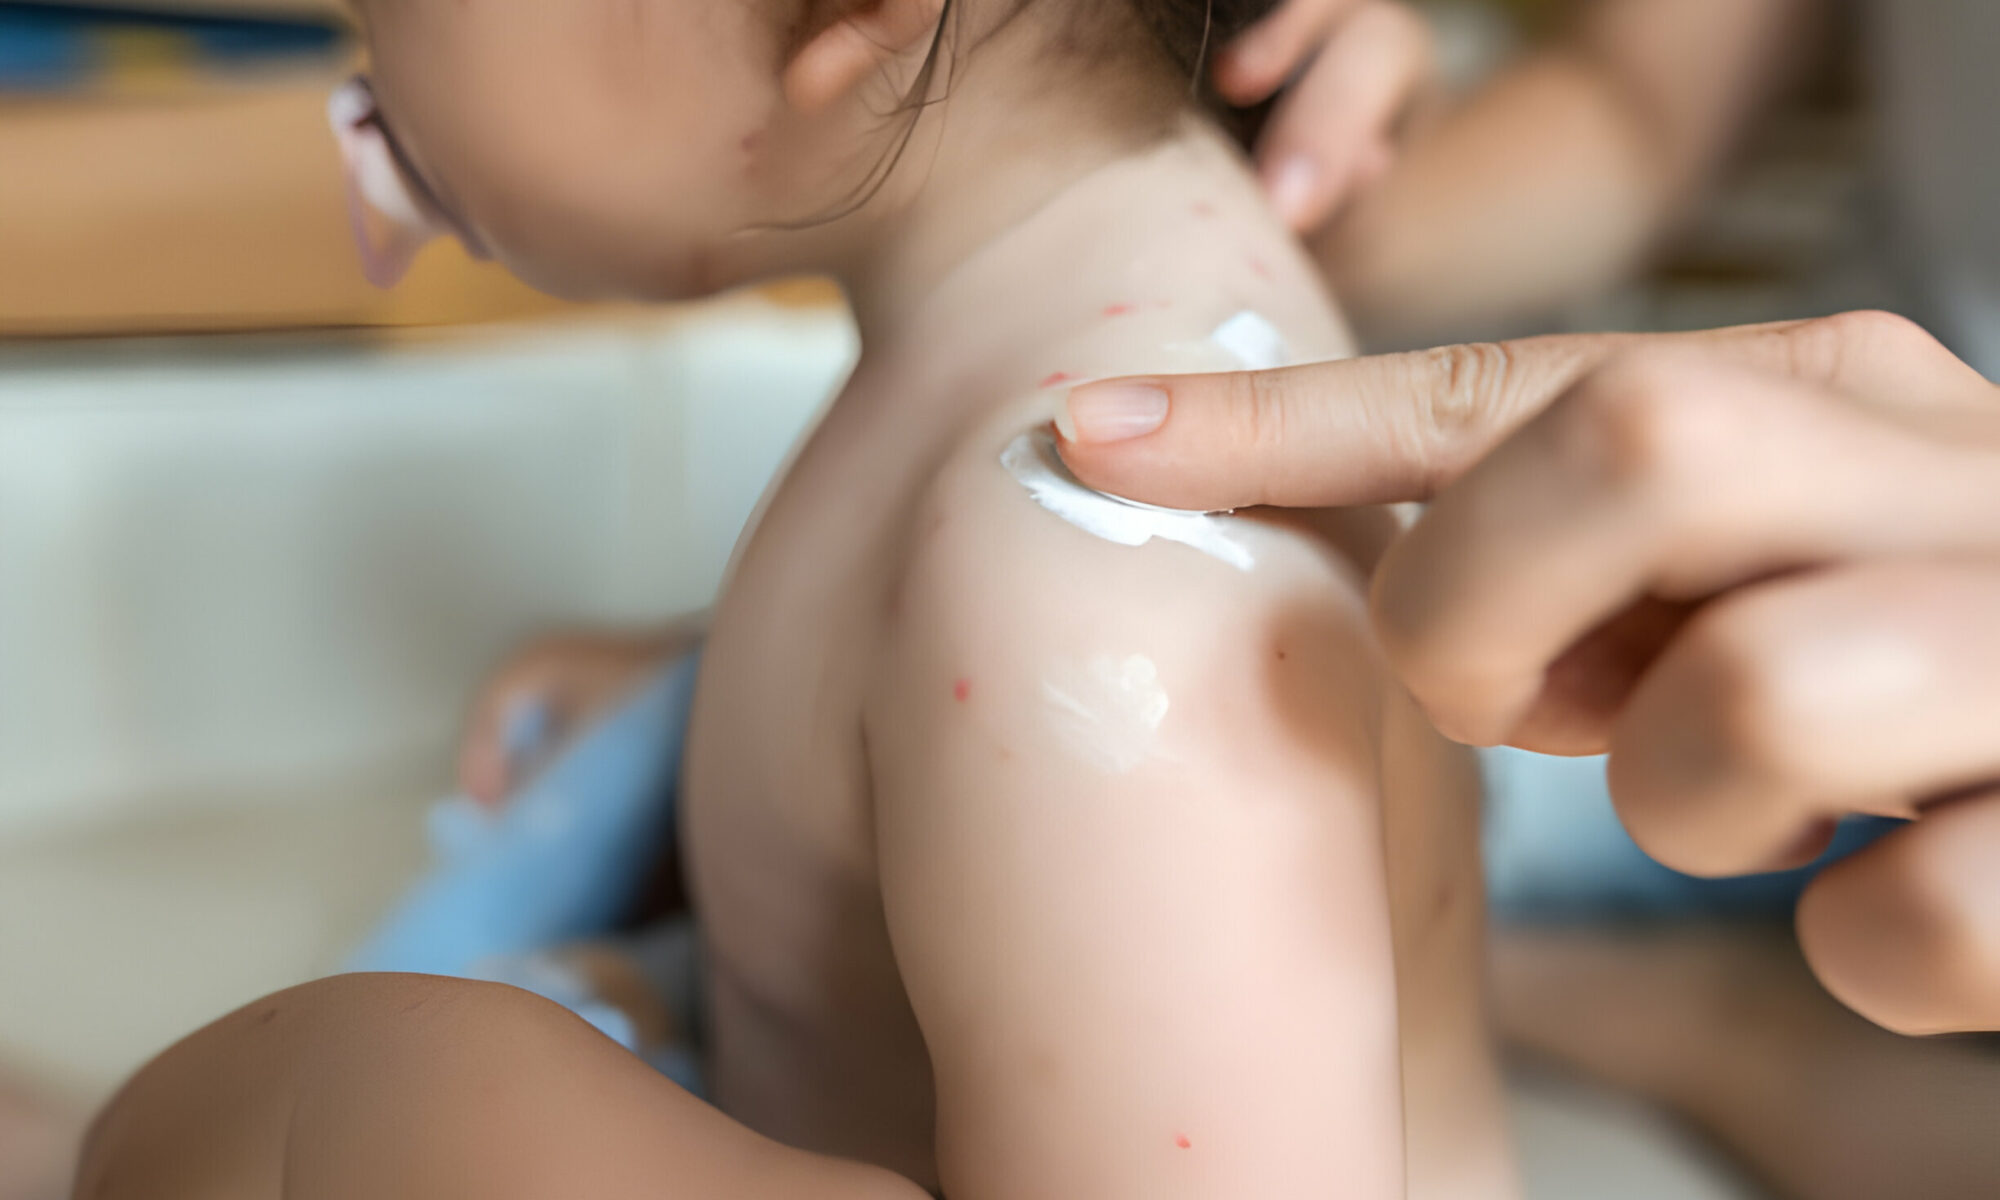 How to Know When Your Baby Needs Urgent Care for Rashes